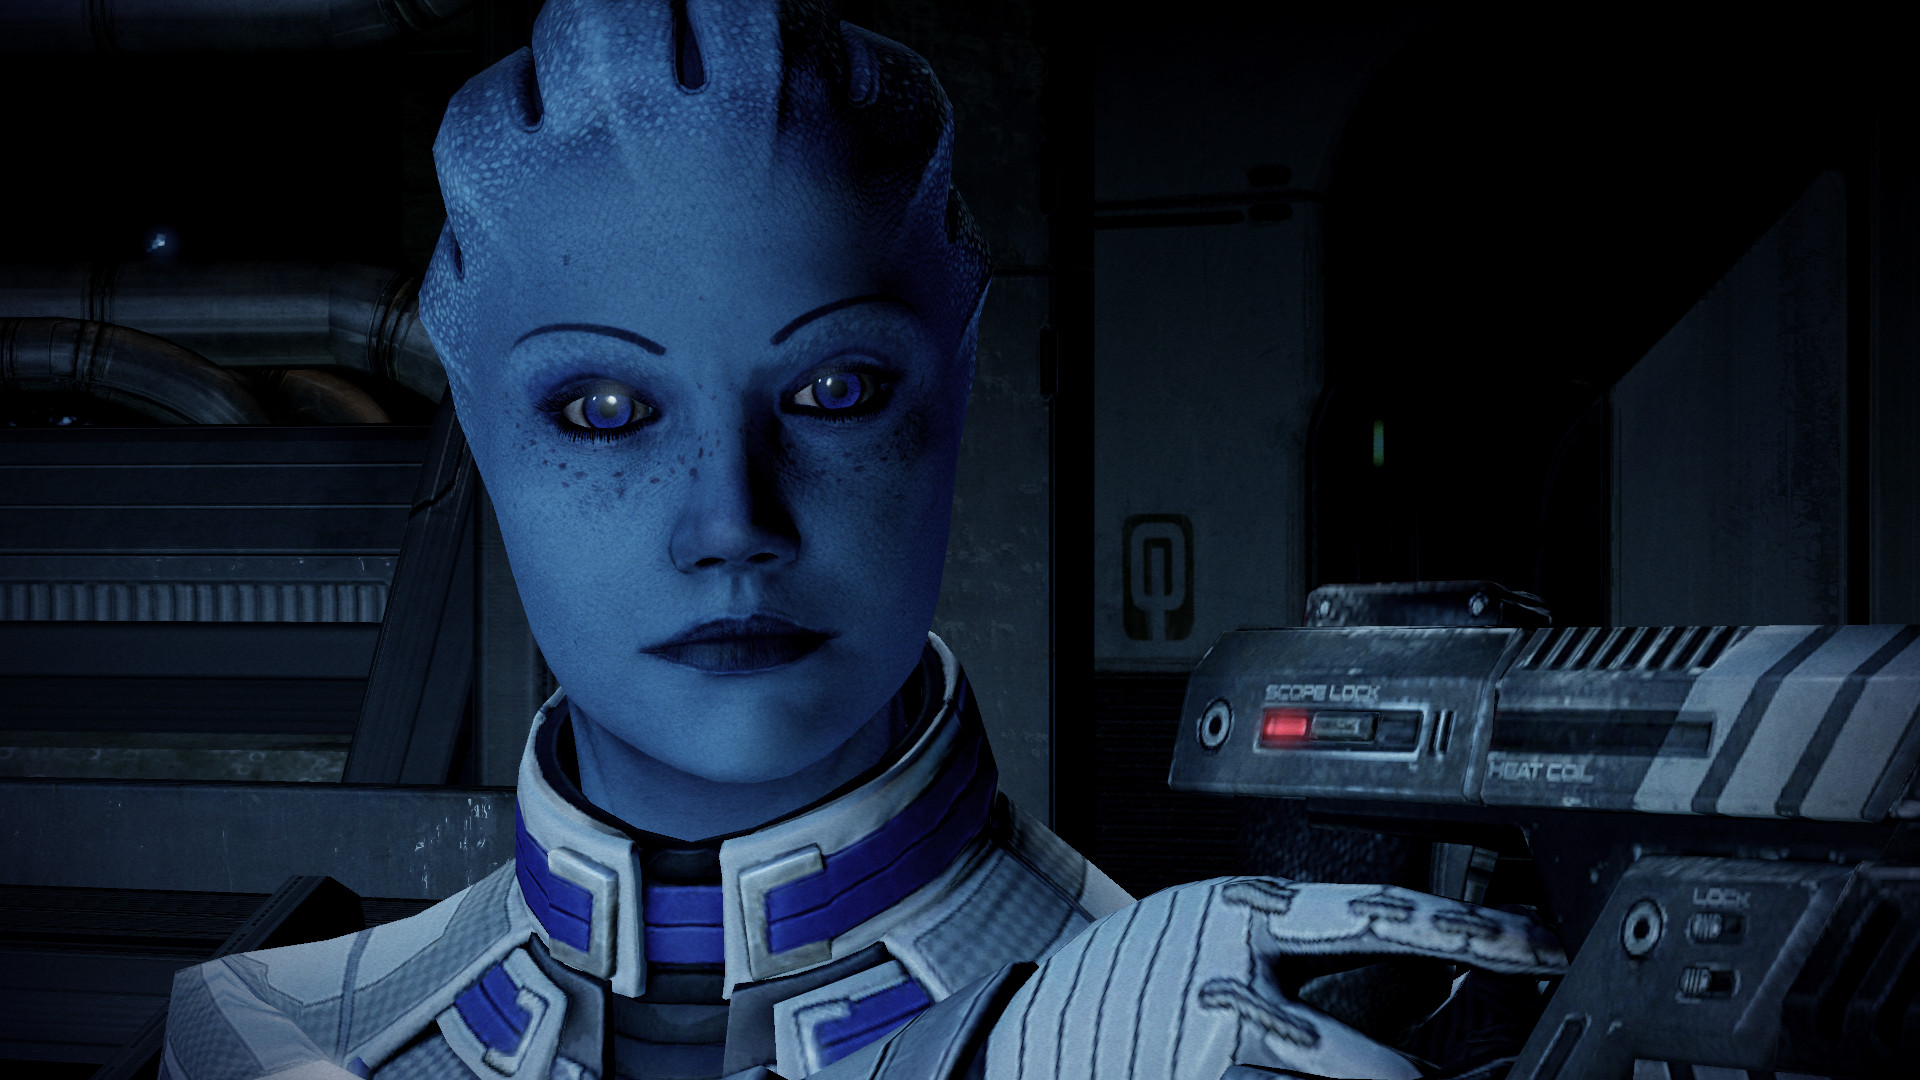 Liara T Soni For Me3 Squadmate And Li Mass Effect Support